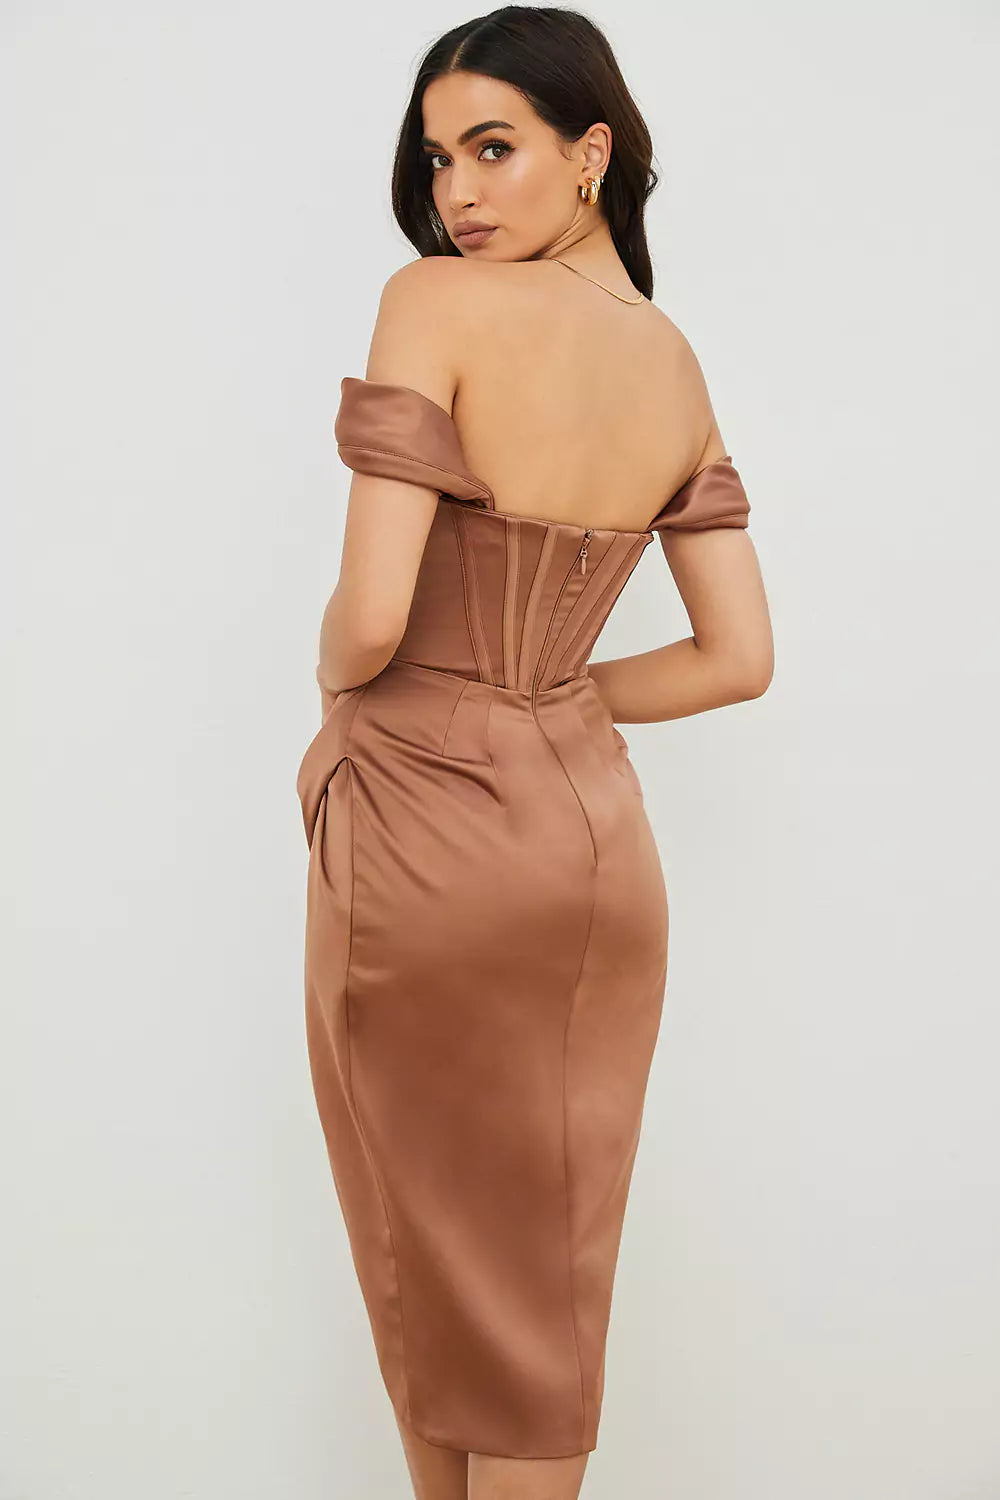 The back view of a woman in a brown satin midi dress.